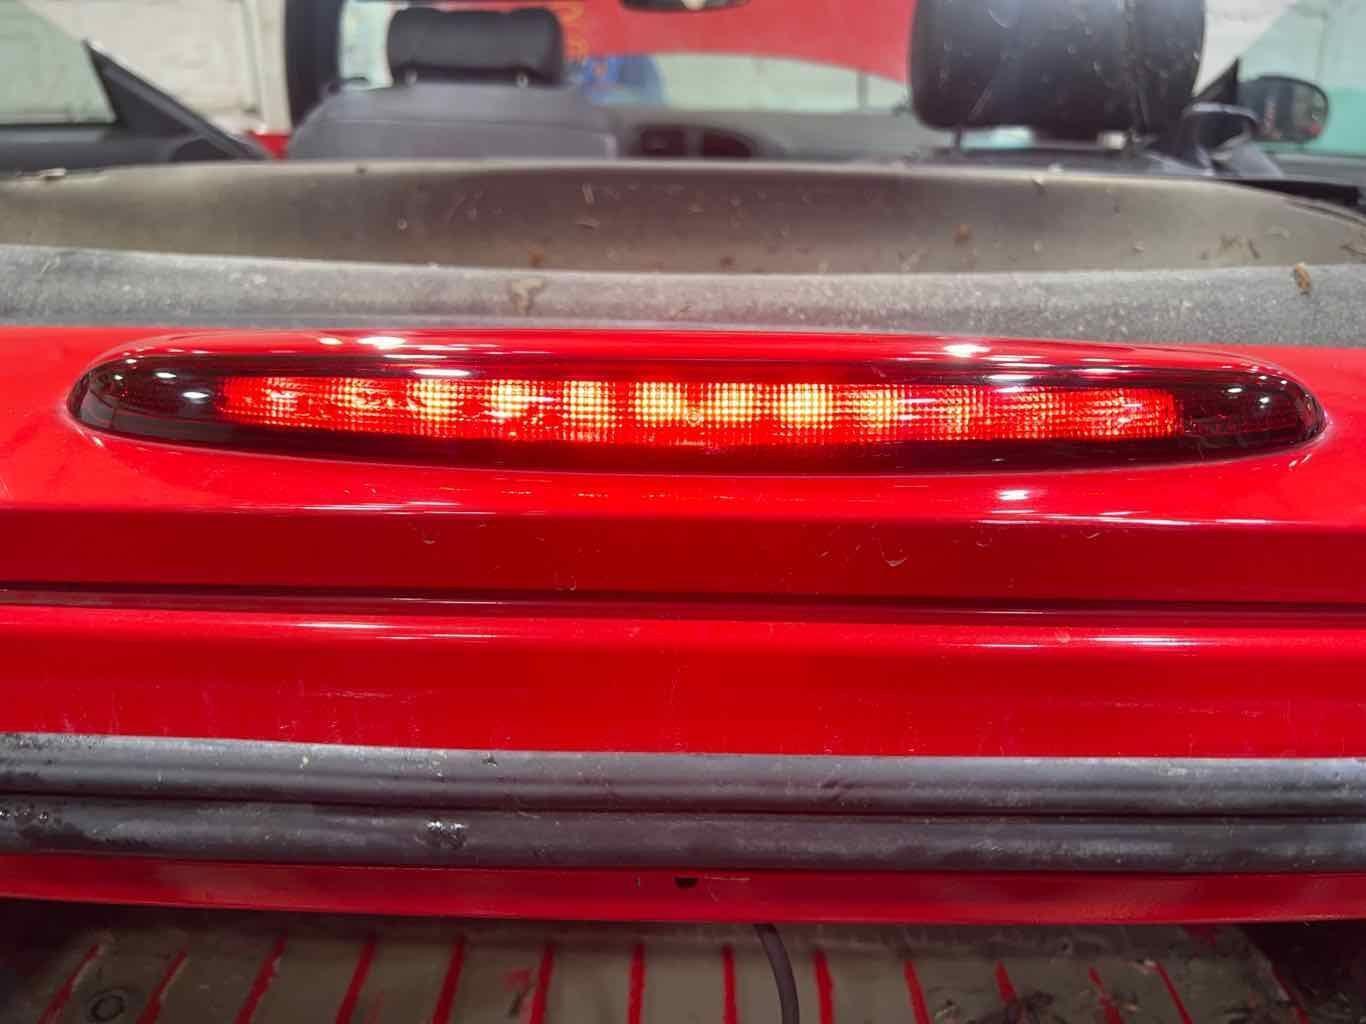 02-05 Ford Thunderbird LED 3RD Brake Light W/Surround (Colorado Red D3) Tested